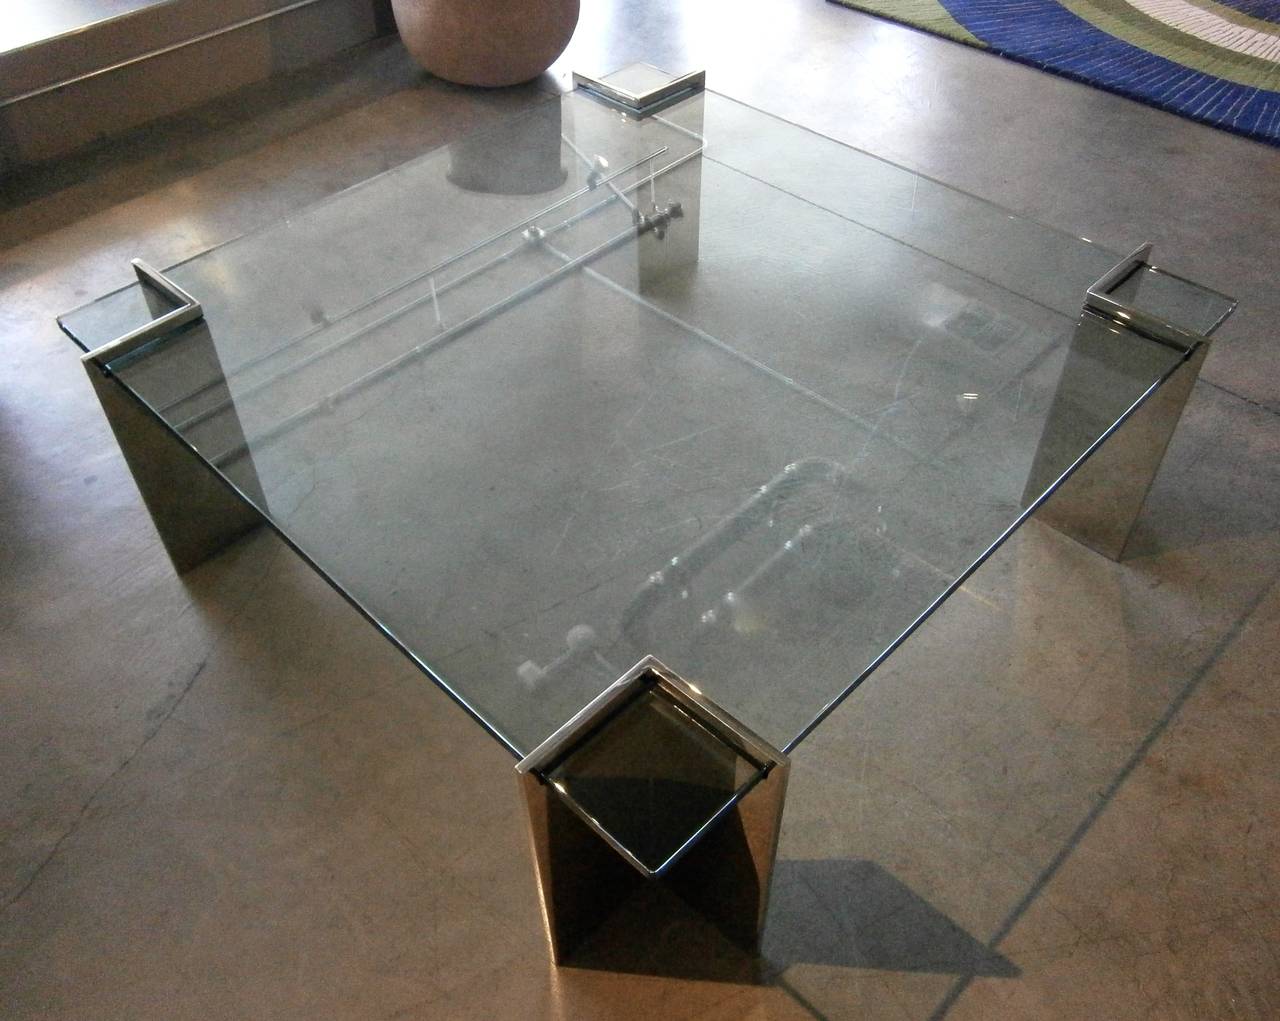 A sensational glass and polished steel square coffee table designed by Leon Rosen for Pace Collection. C. 1970s. The 3/4